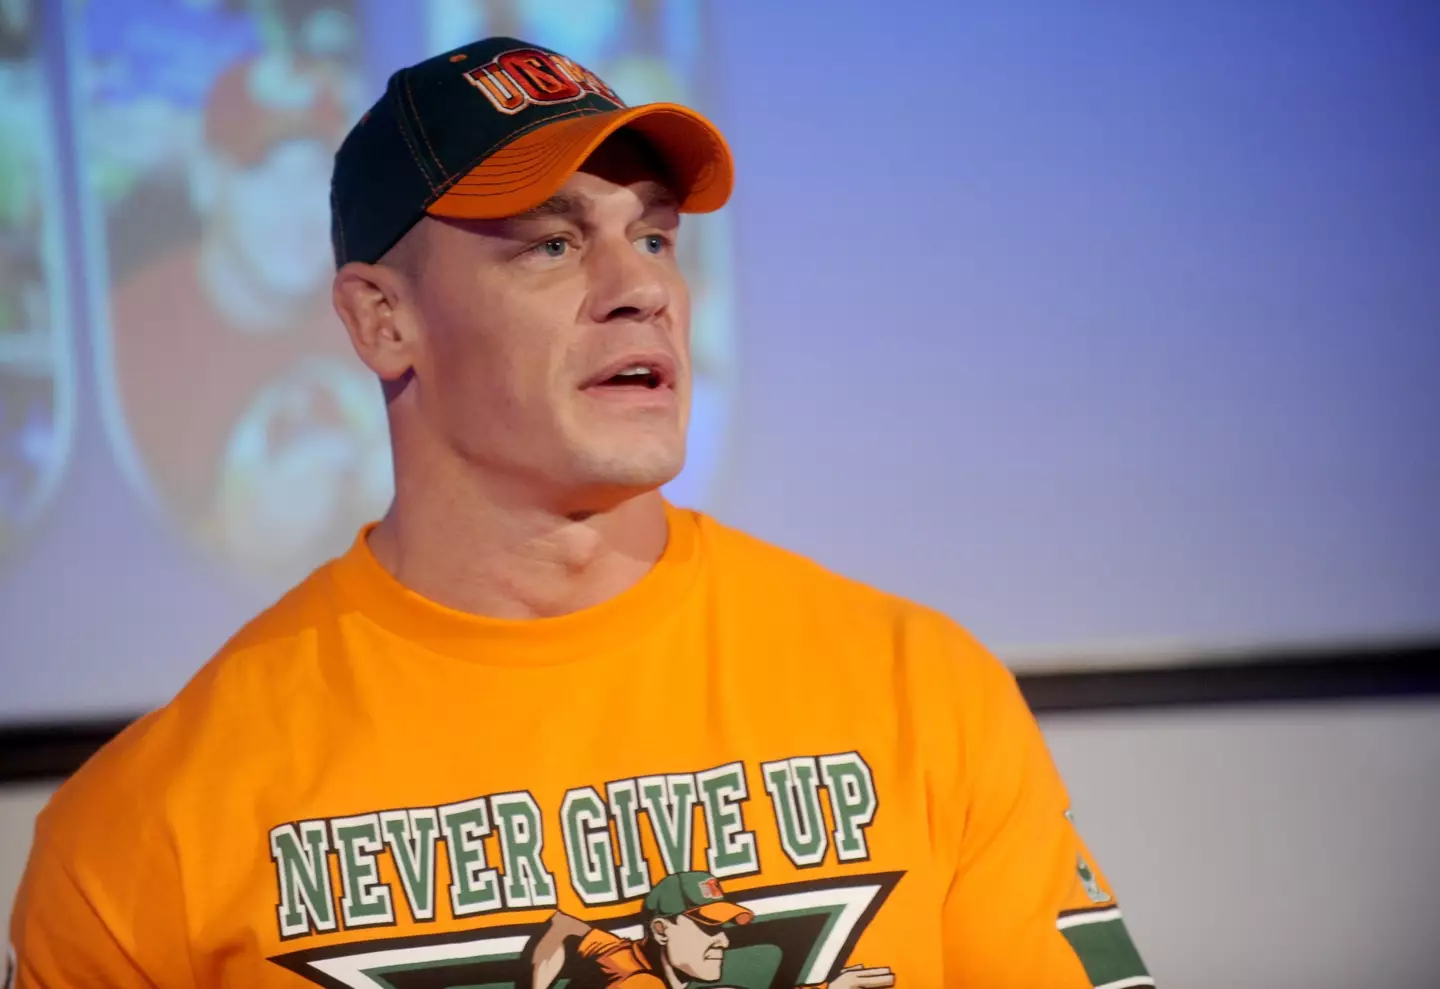 Cena pictured in 2015. (Image